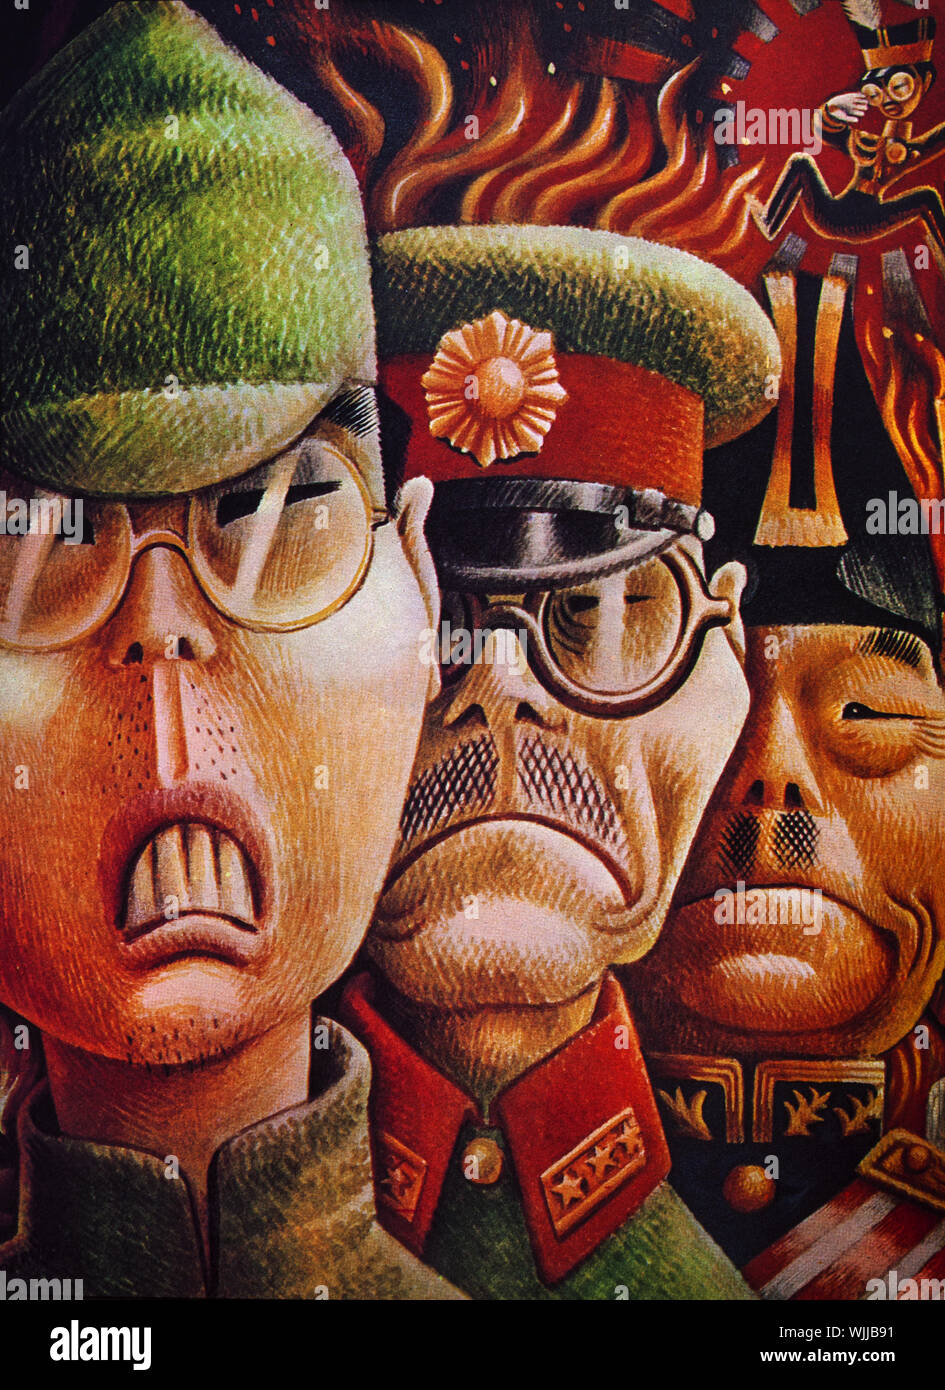 A World War Two illustration on the cover of Fortune Magazine following the Japanes attack on Pearl Harbour. It shows a Japanese soldier, Prime Minister Tojo and Admiral Nagumo who organised the raid. Floating above them in the corner is the Japanese Emperor Hirohito. Stock Photo